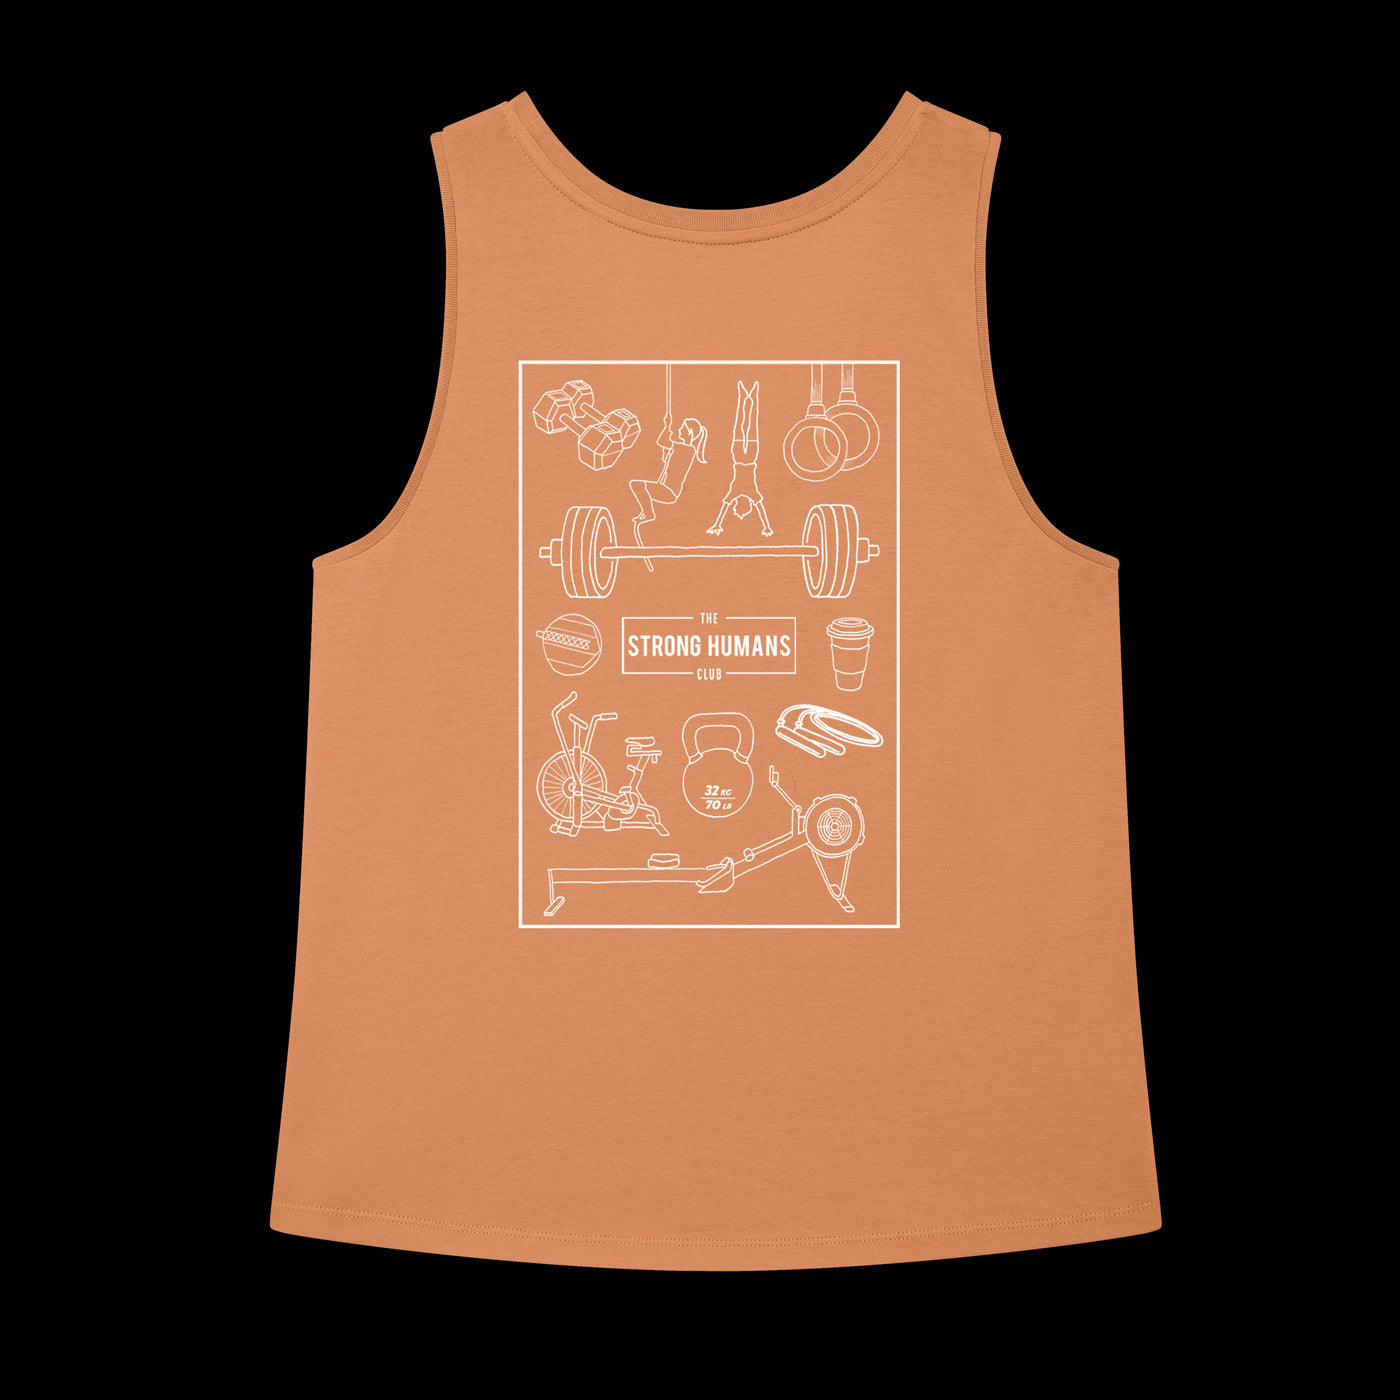 Women's Athlete Design Relaxed Fit Tank Top